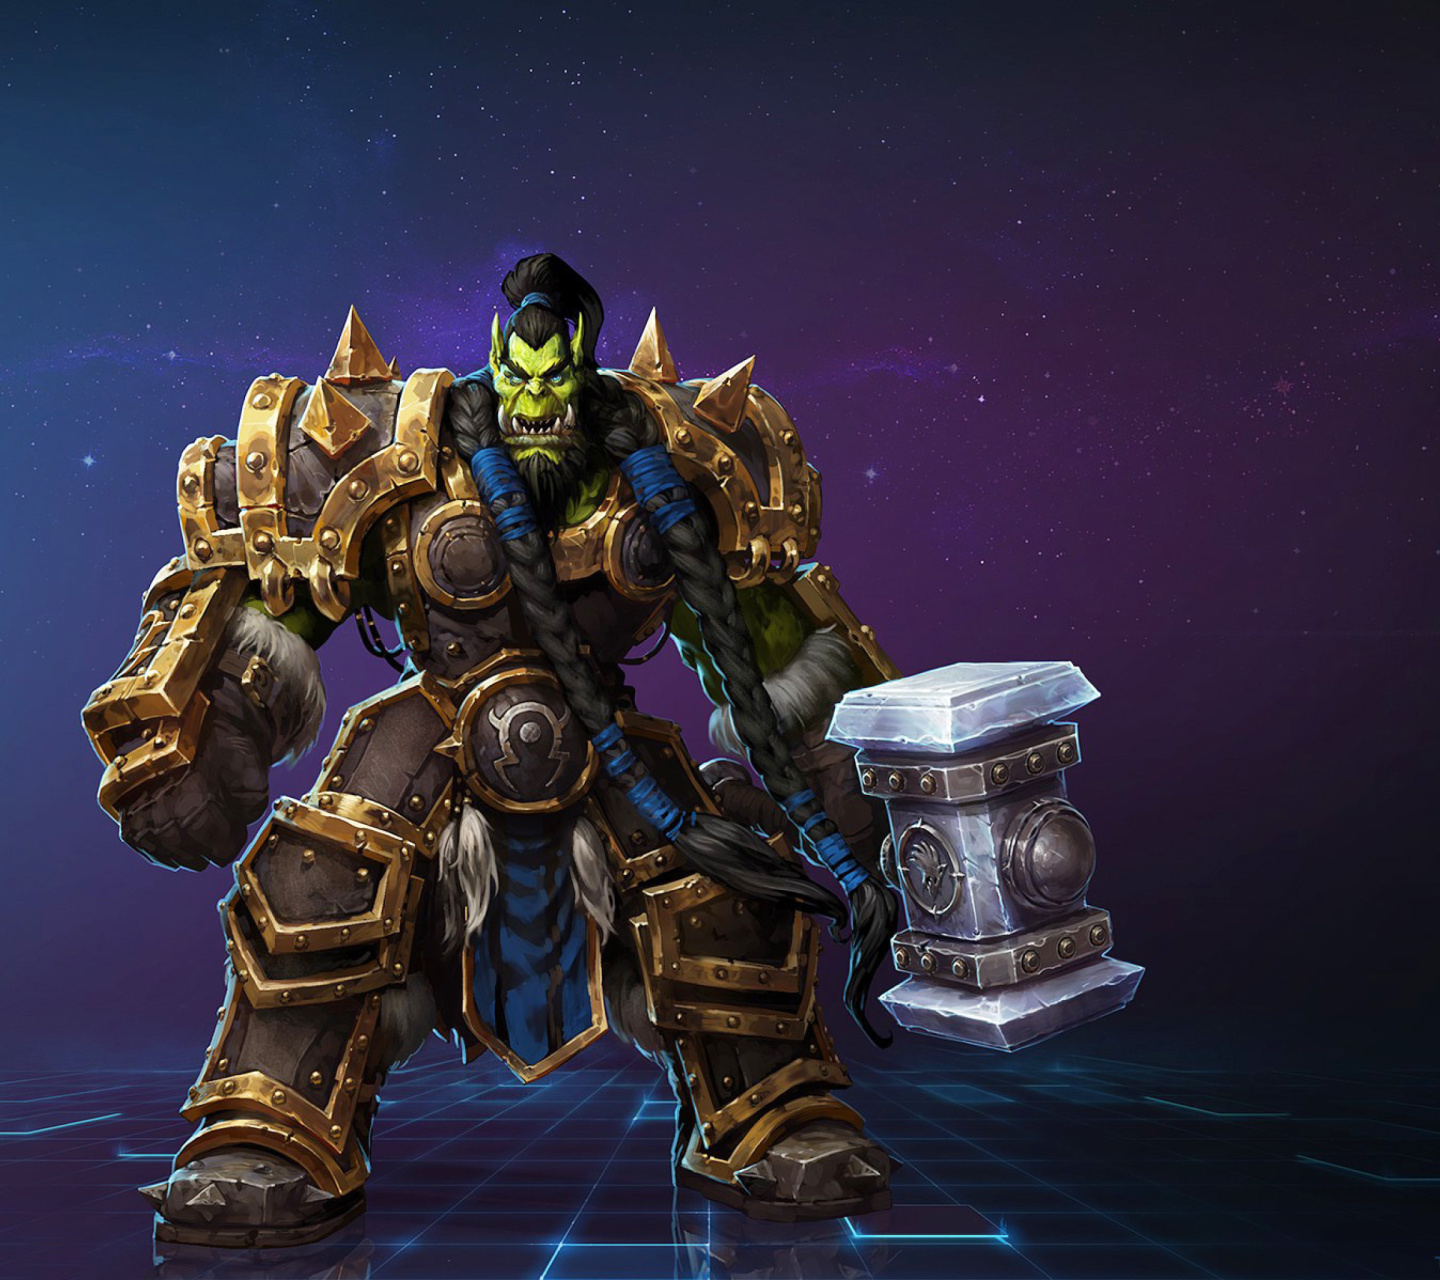 Das Heroes of the Storm multiplayer online battle arena video game Wallpaper 1440x1280